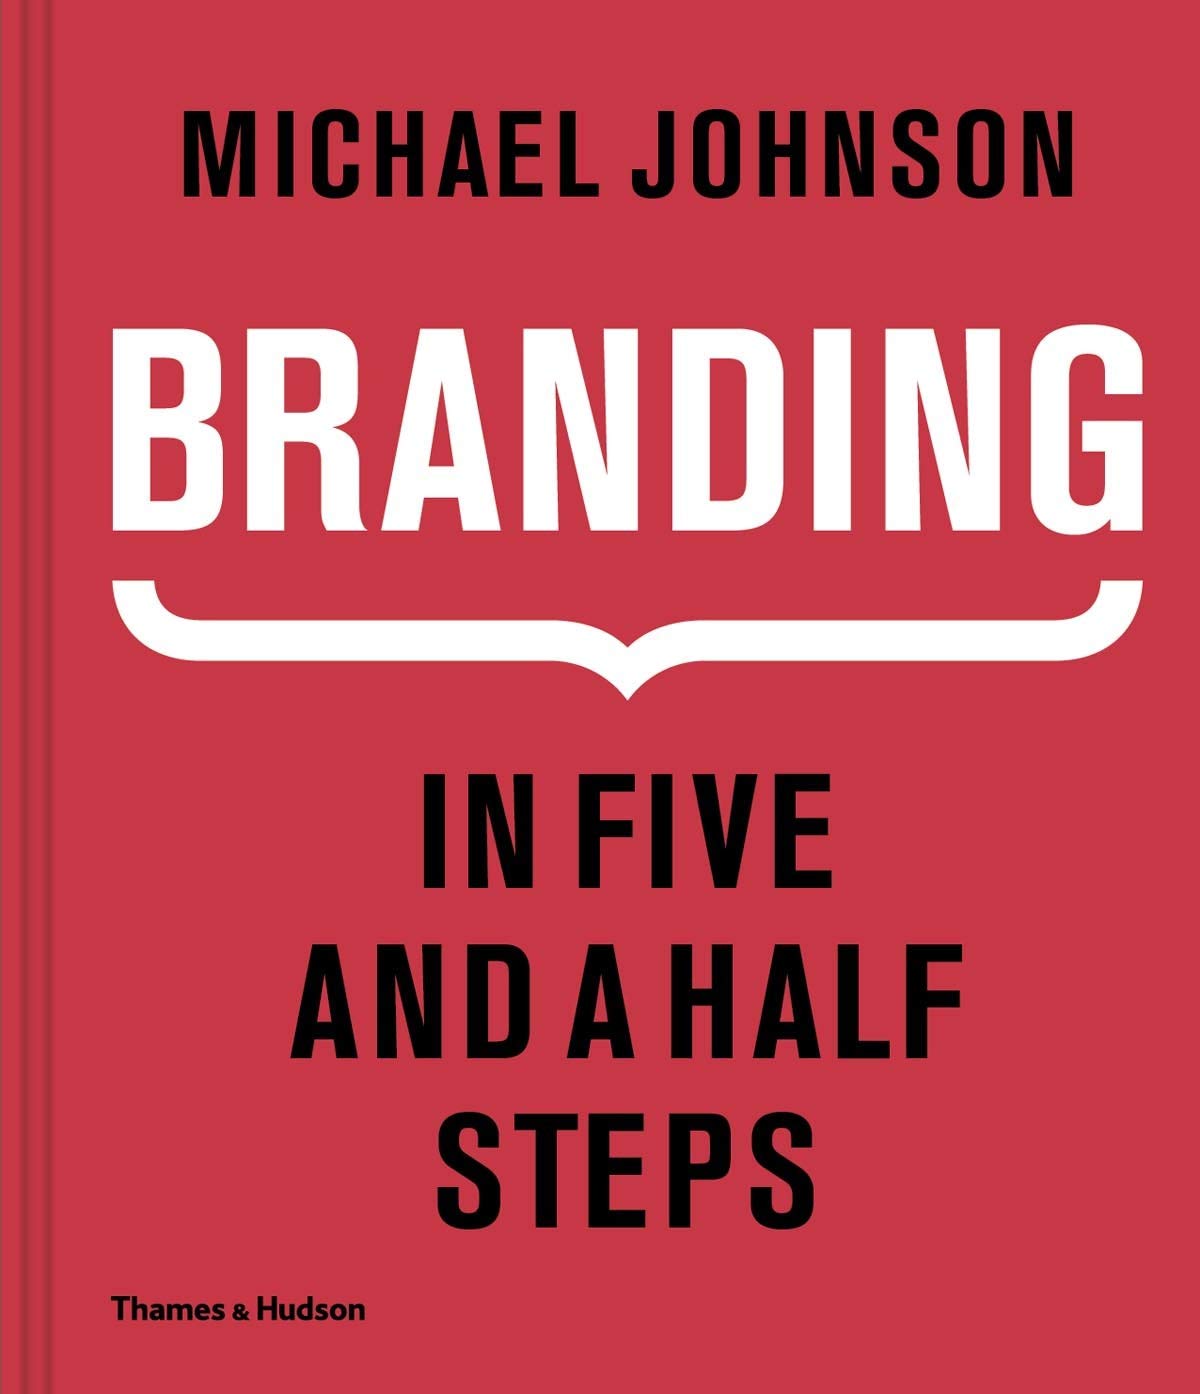 Michael Johnson: Branding - In Five and a Half Steps